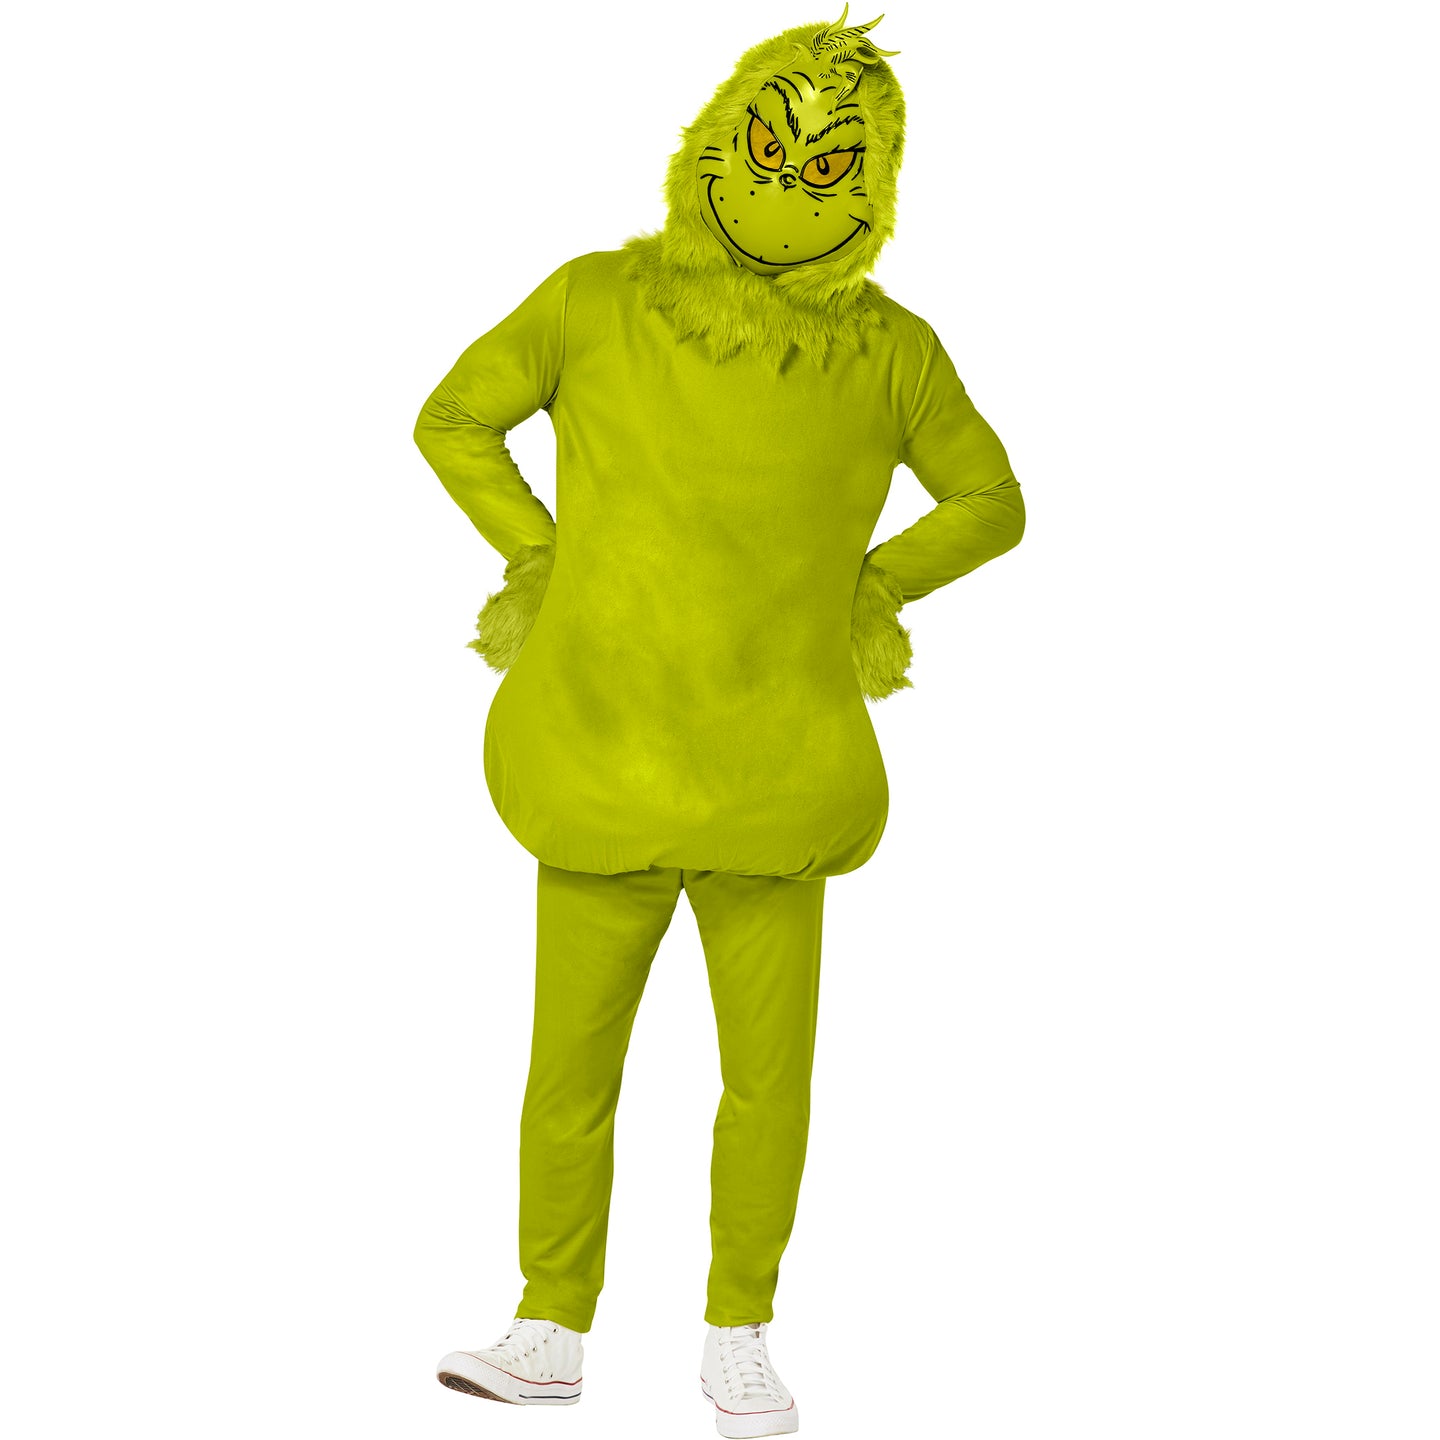 InSpirit Designs Adult Dr. Suess The Grinch Costume